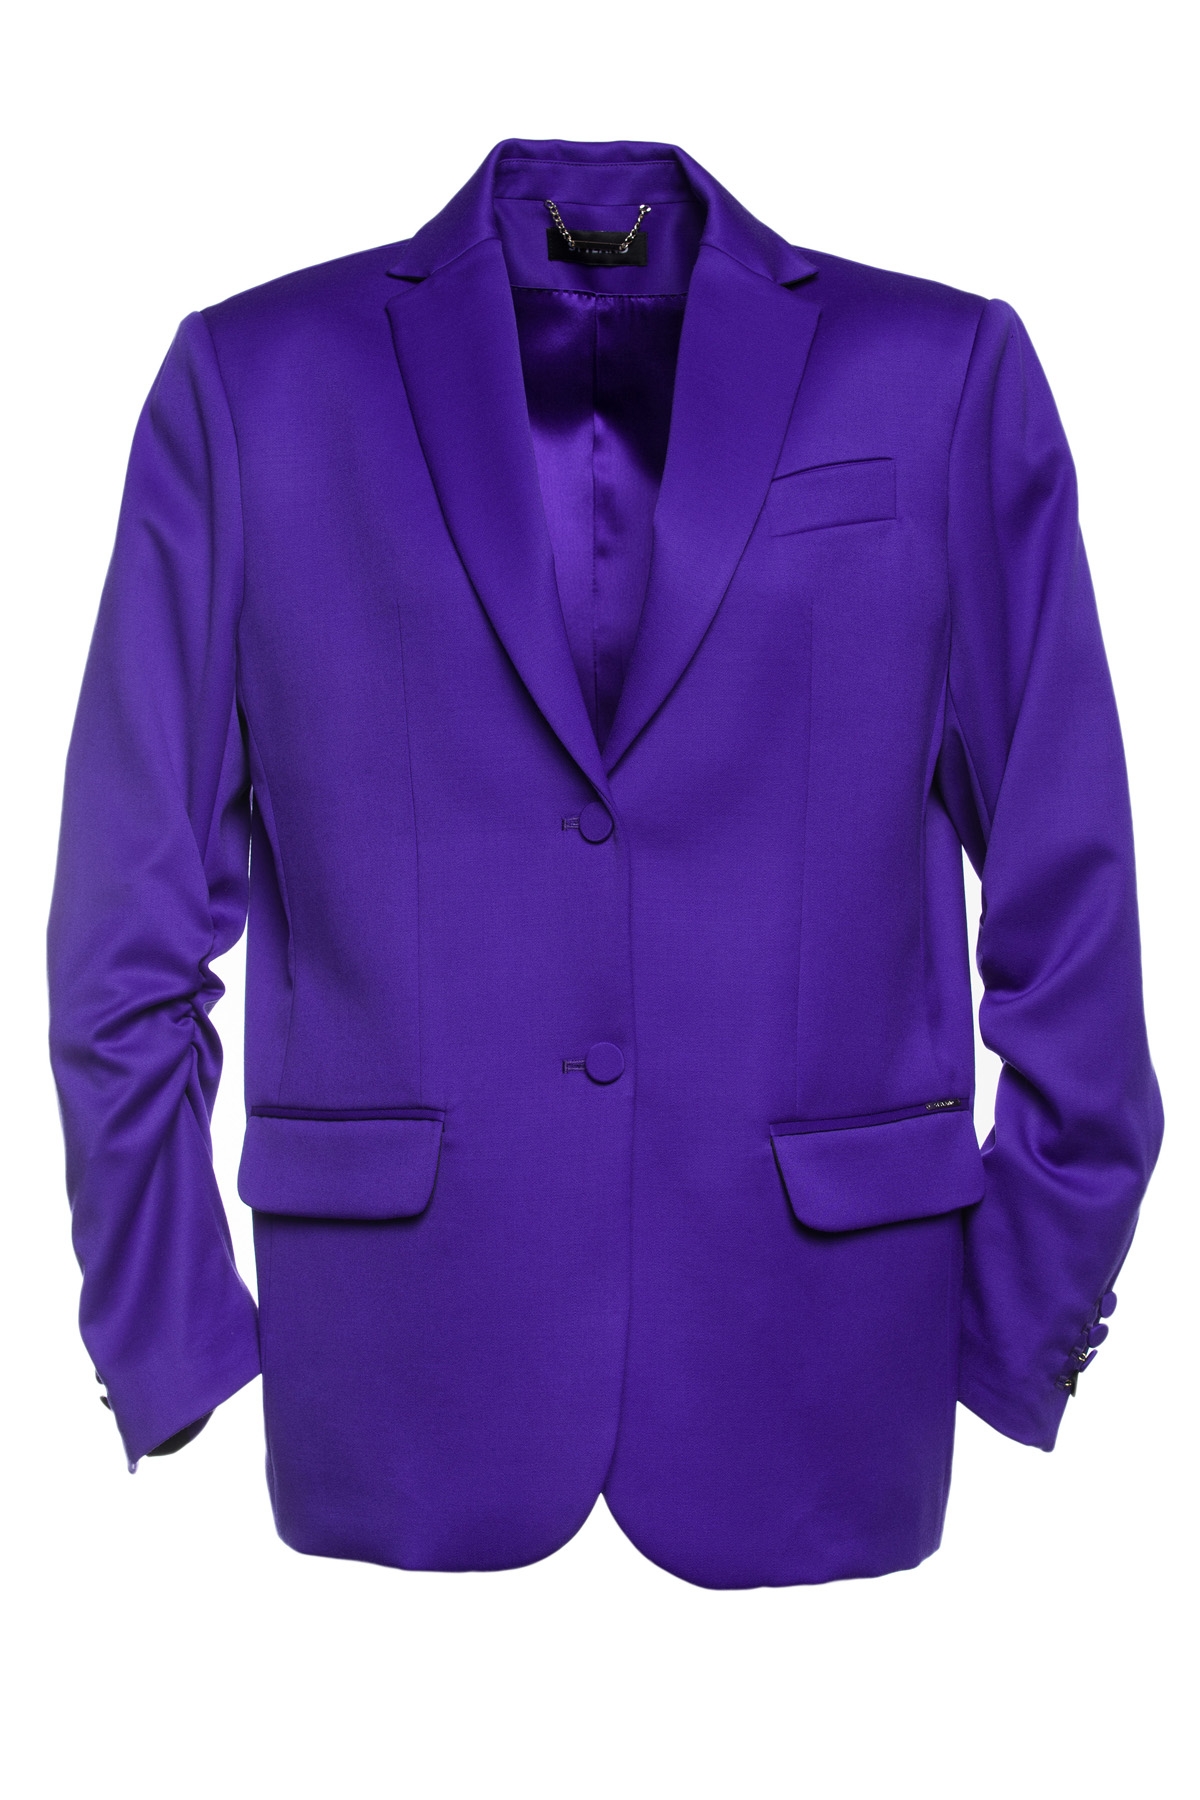 PURPLE OVER-SIZED BLAZER WITH BLACK DETAILS - STYLAND